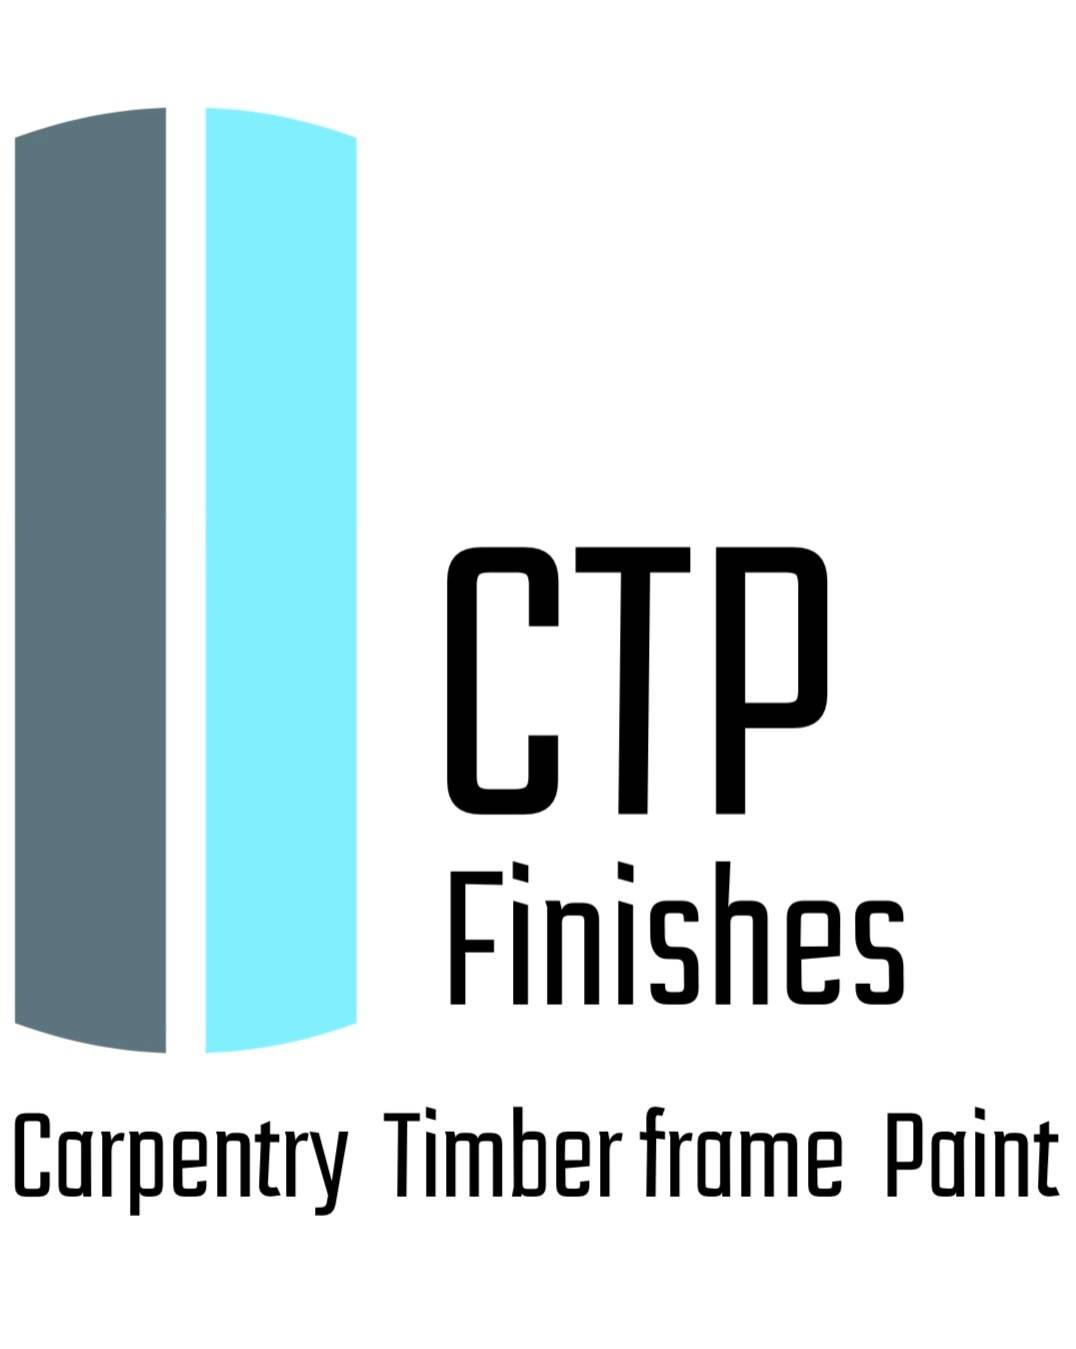 CTP Finishes